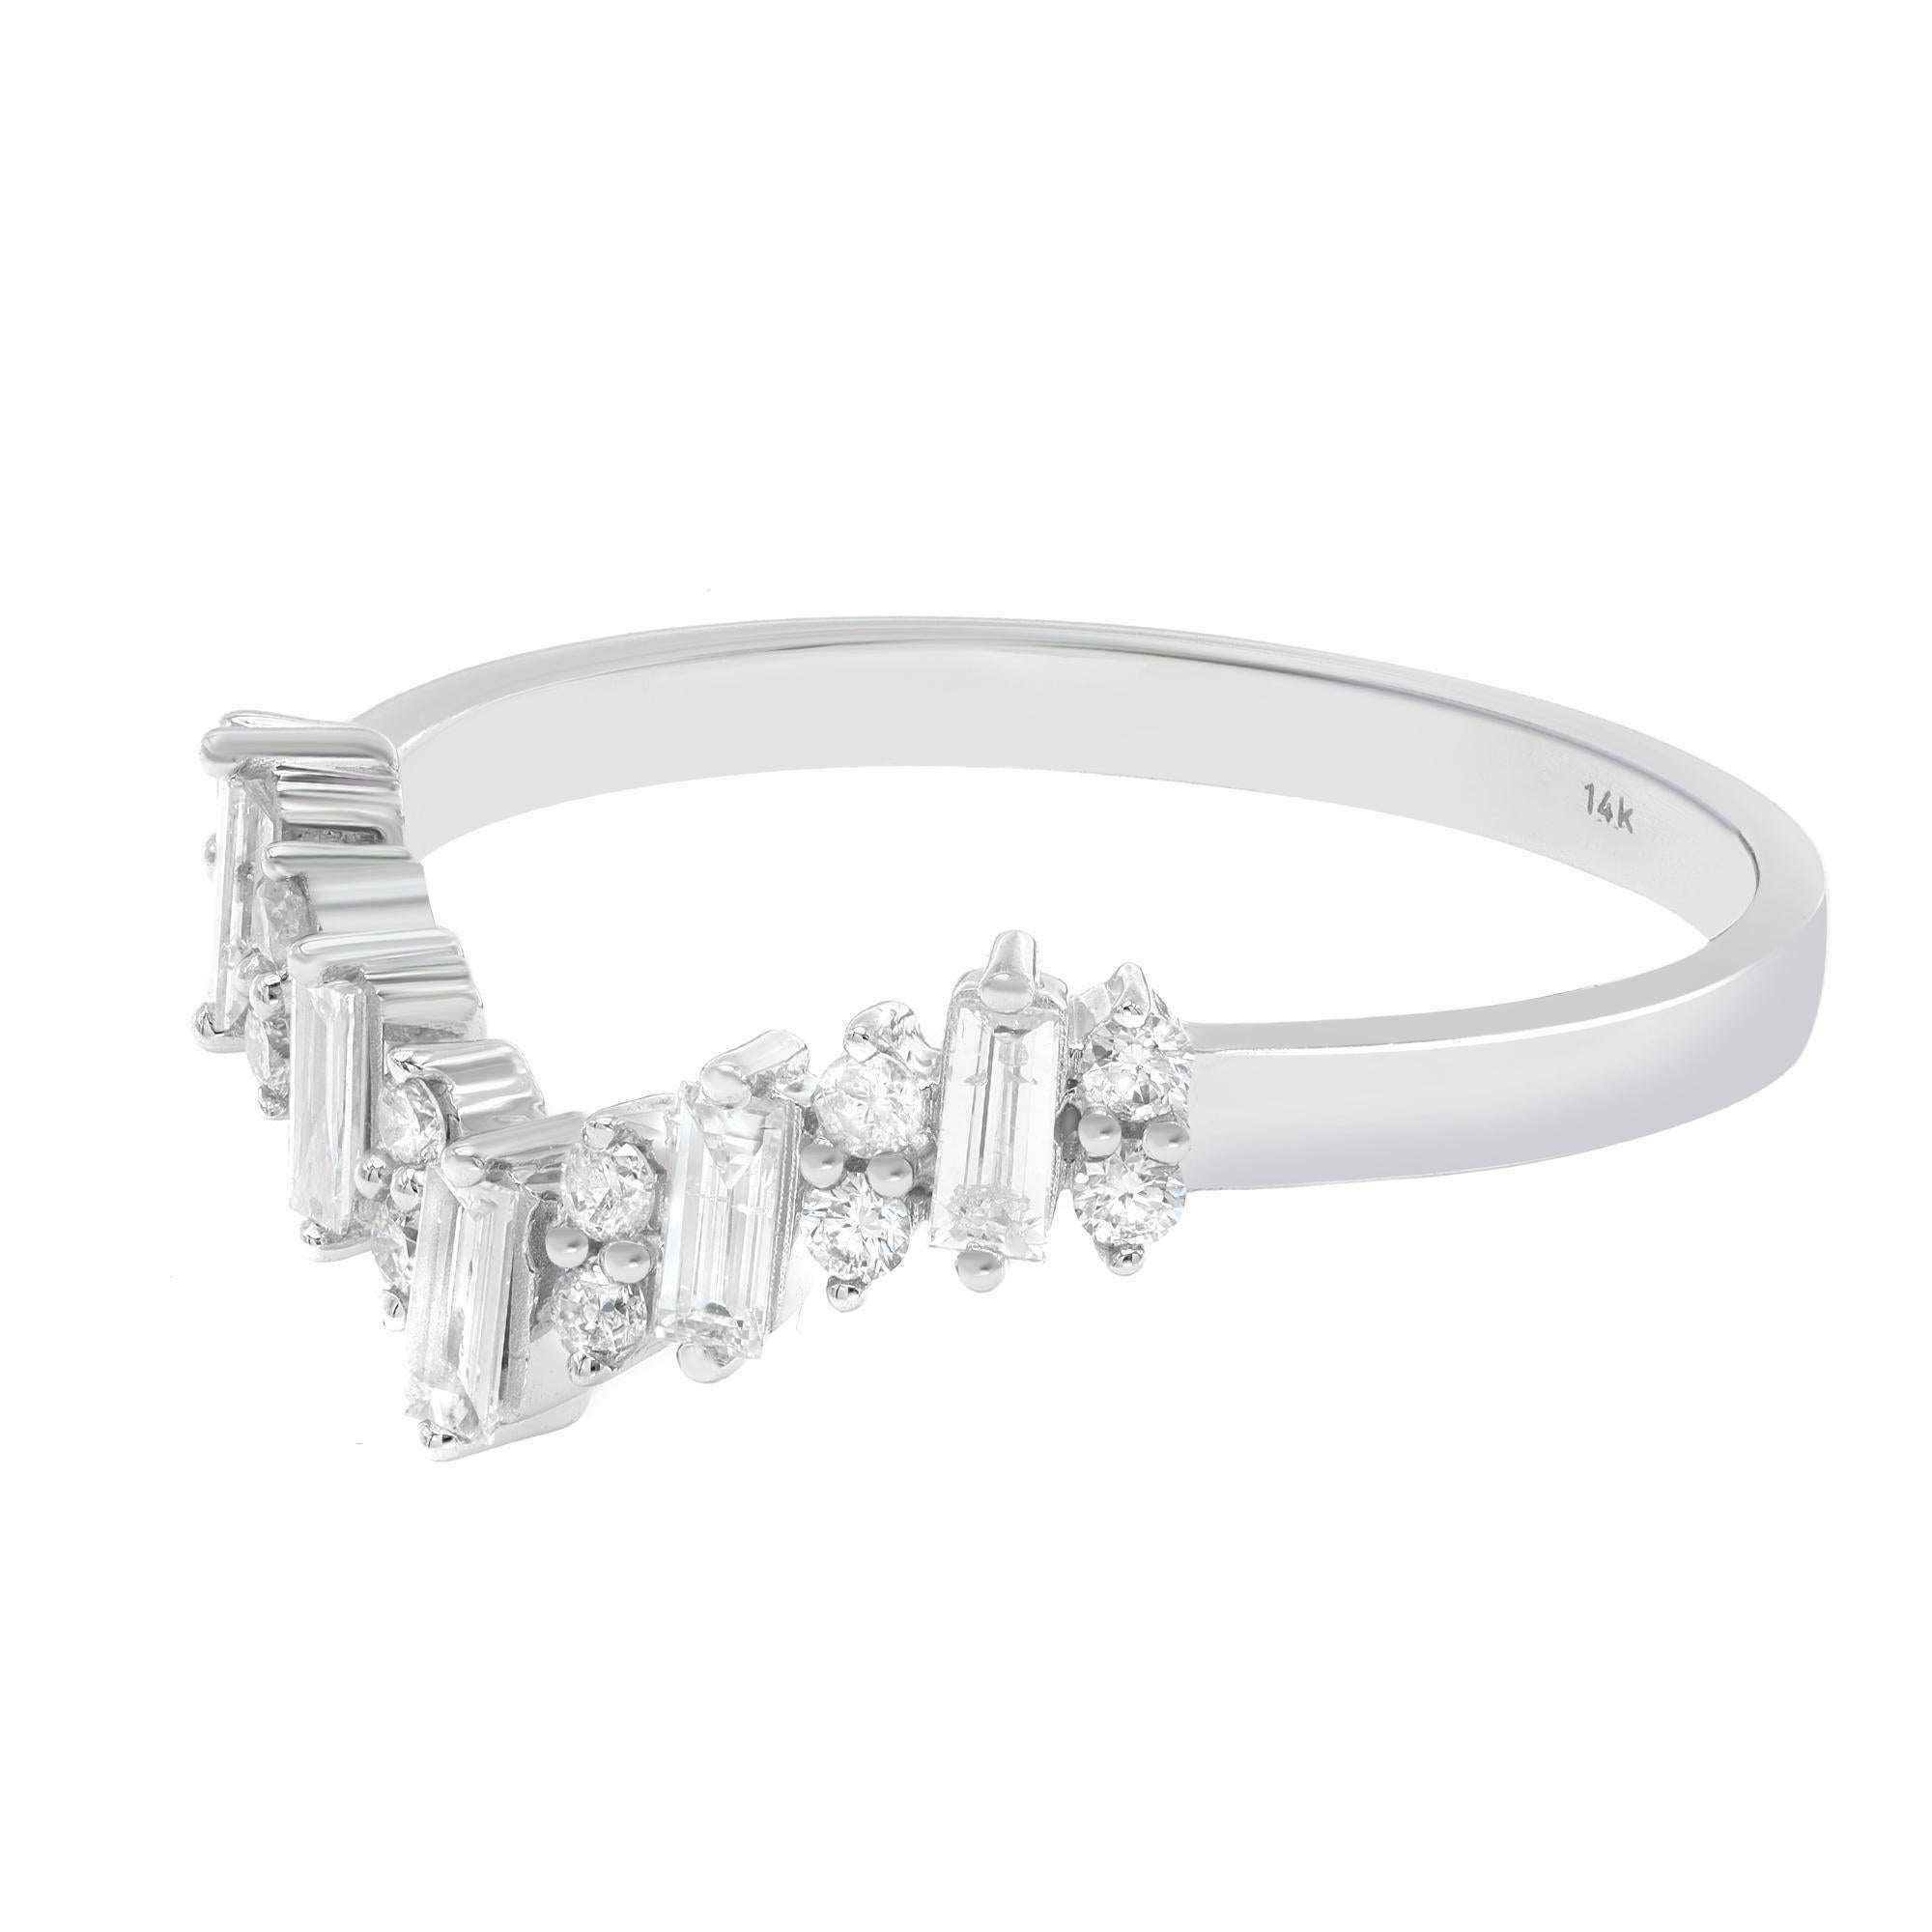 This beautiful and delicate diamond ring is a perfect fit for any occasion. Crafted in 14K white gold. Features 5 Baguette cut and 12 round cut diamonds in prong setting. Diamond color G-H and clarity VS-SI. It's stackable and easy to mix and match.